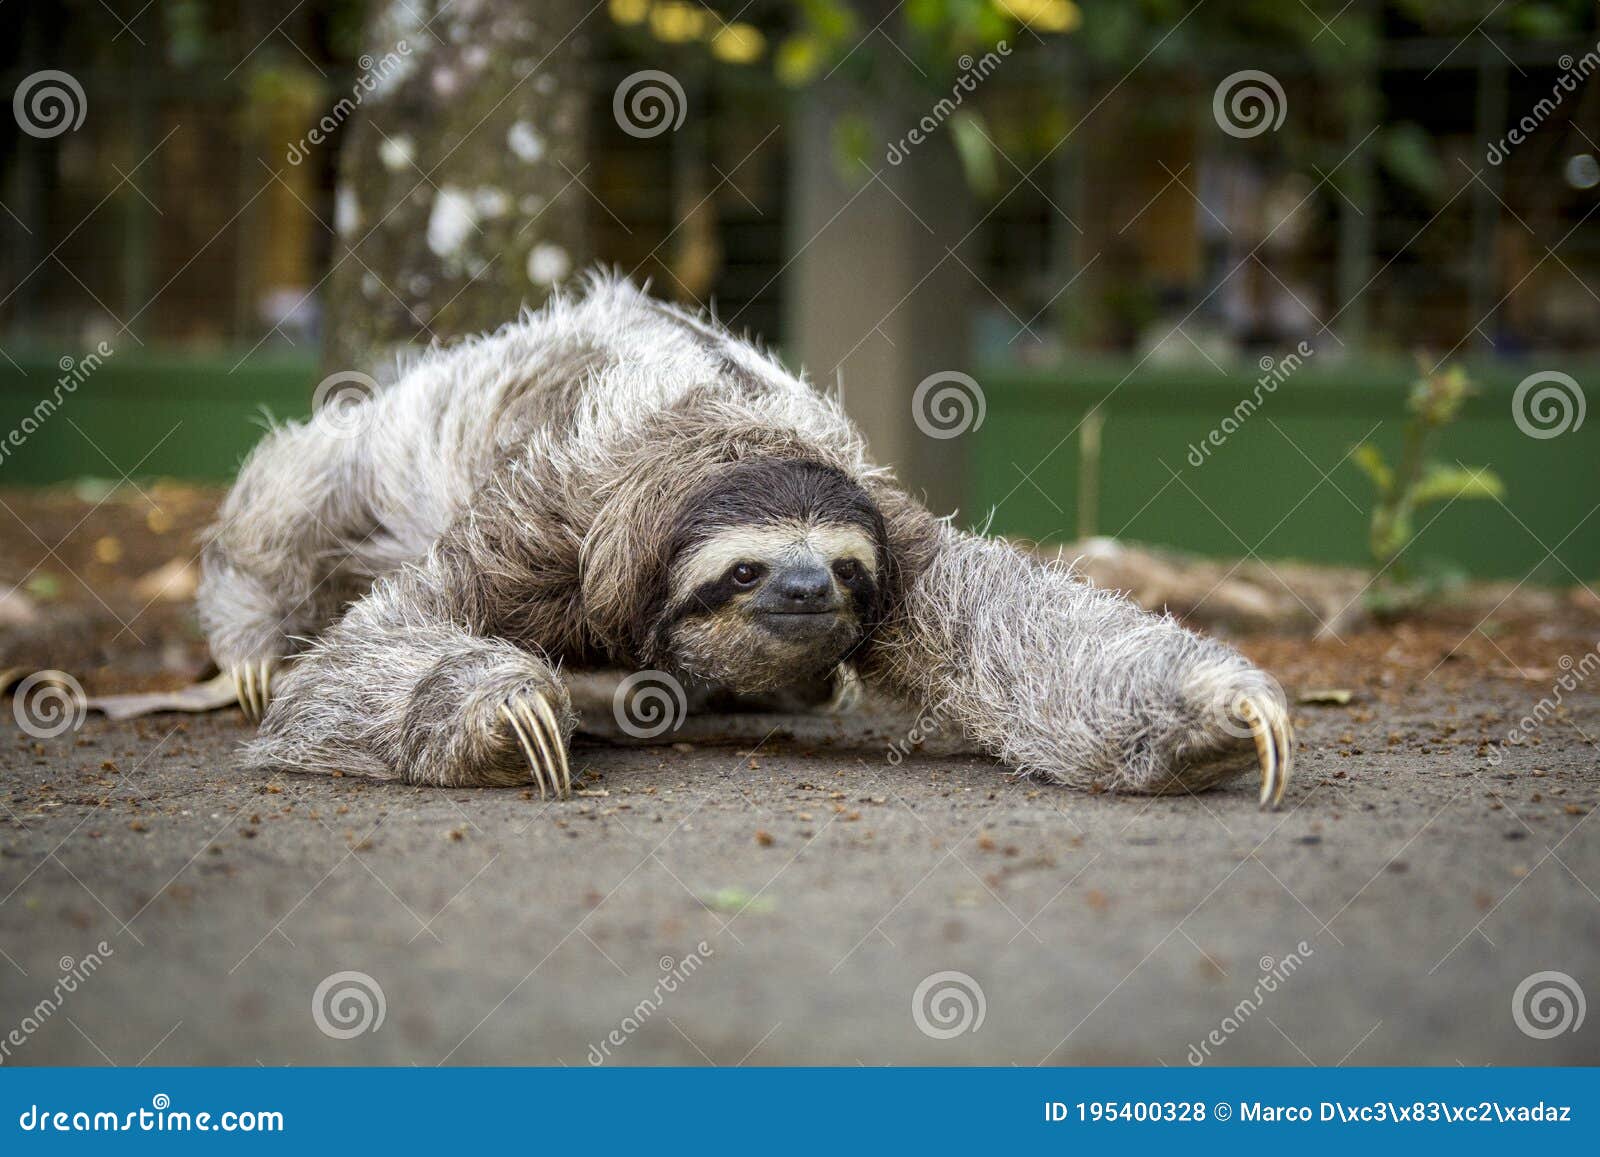 Three-toed Sloth in Costa Rica. Animal of the Tropical Forest. Oso Perezoso  Stock Photo - Image of animal, friendly: 195400328